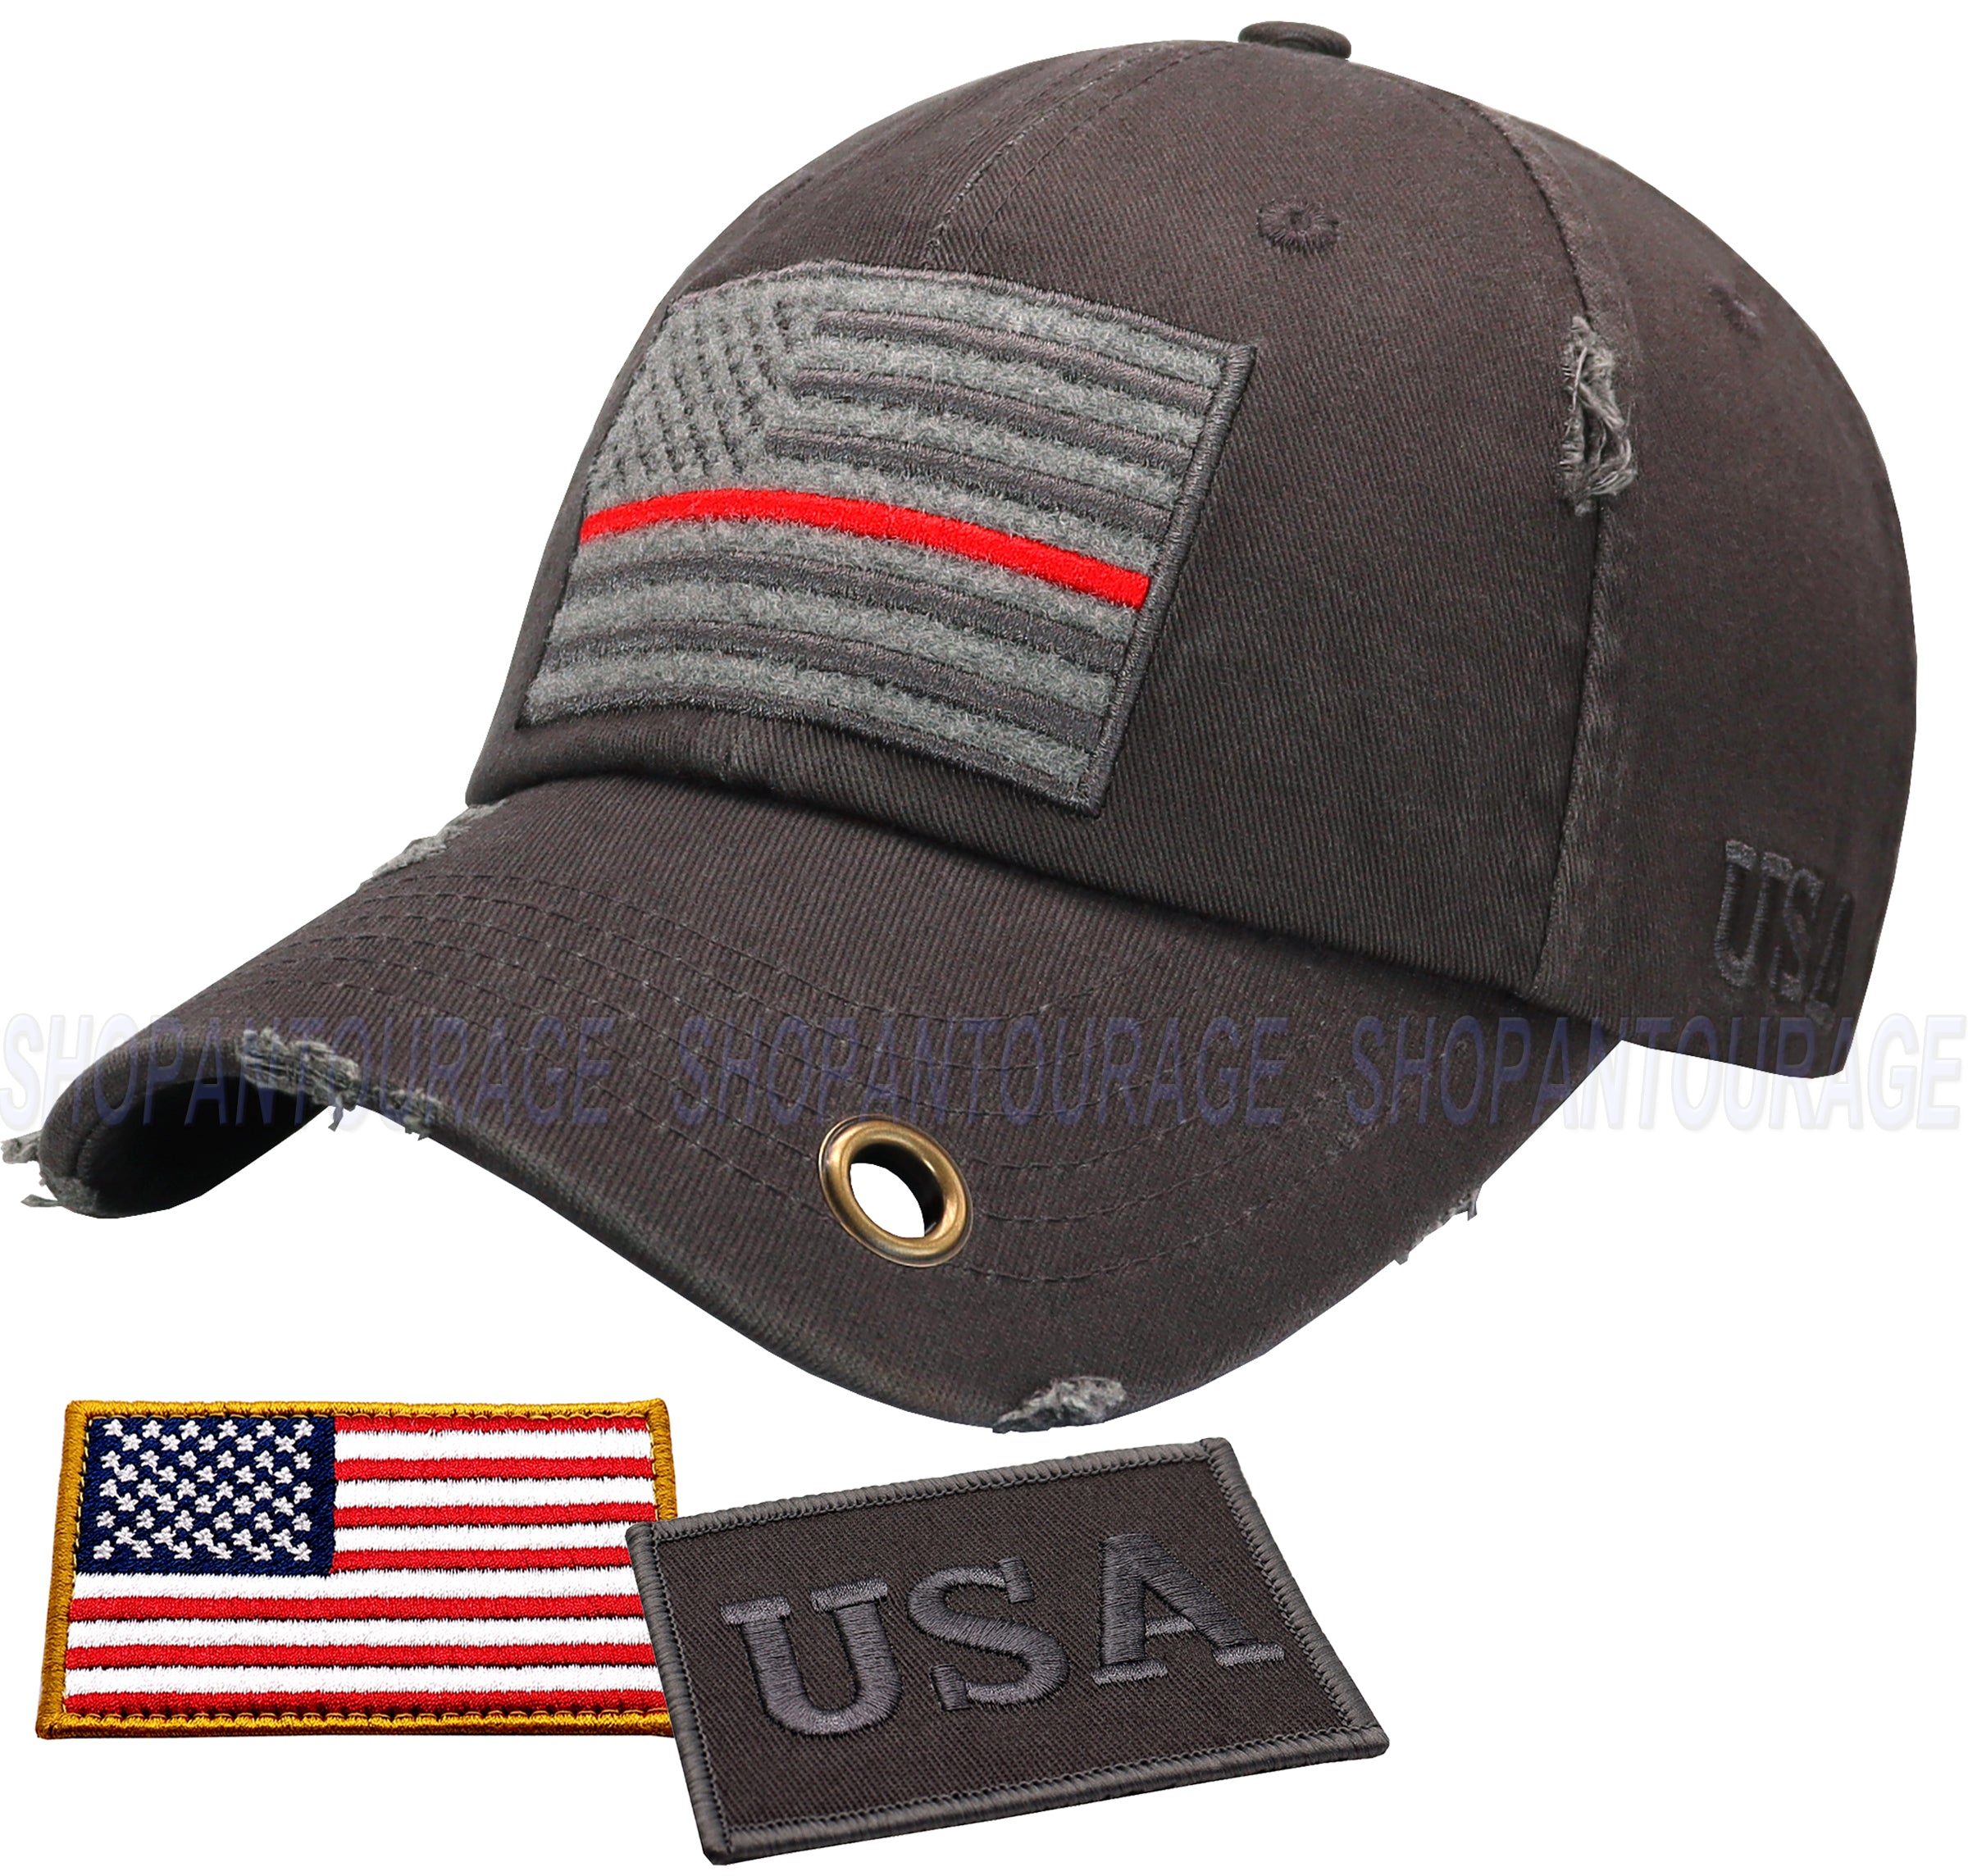 Antourage American Flag Hat for Men and Women